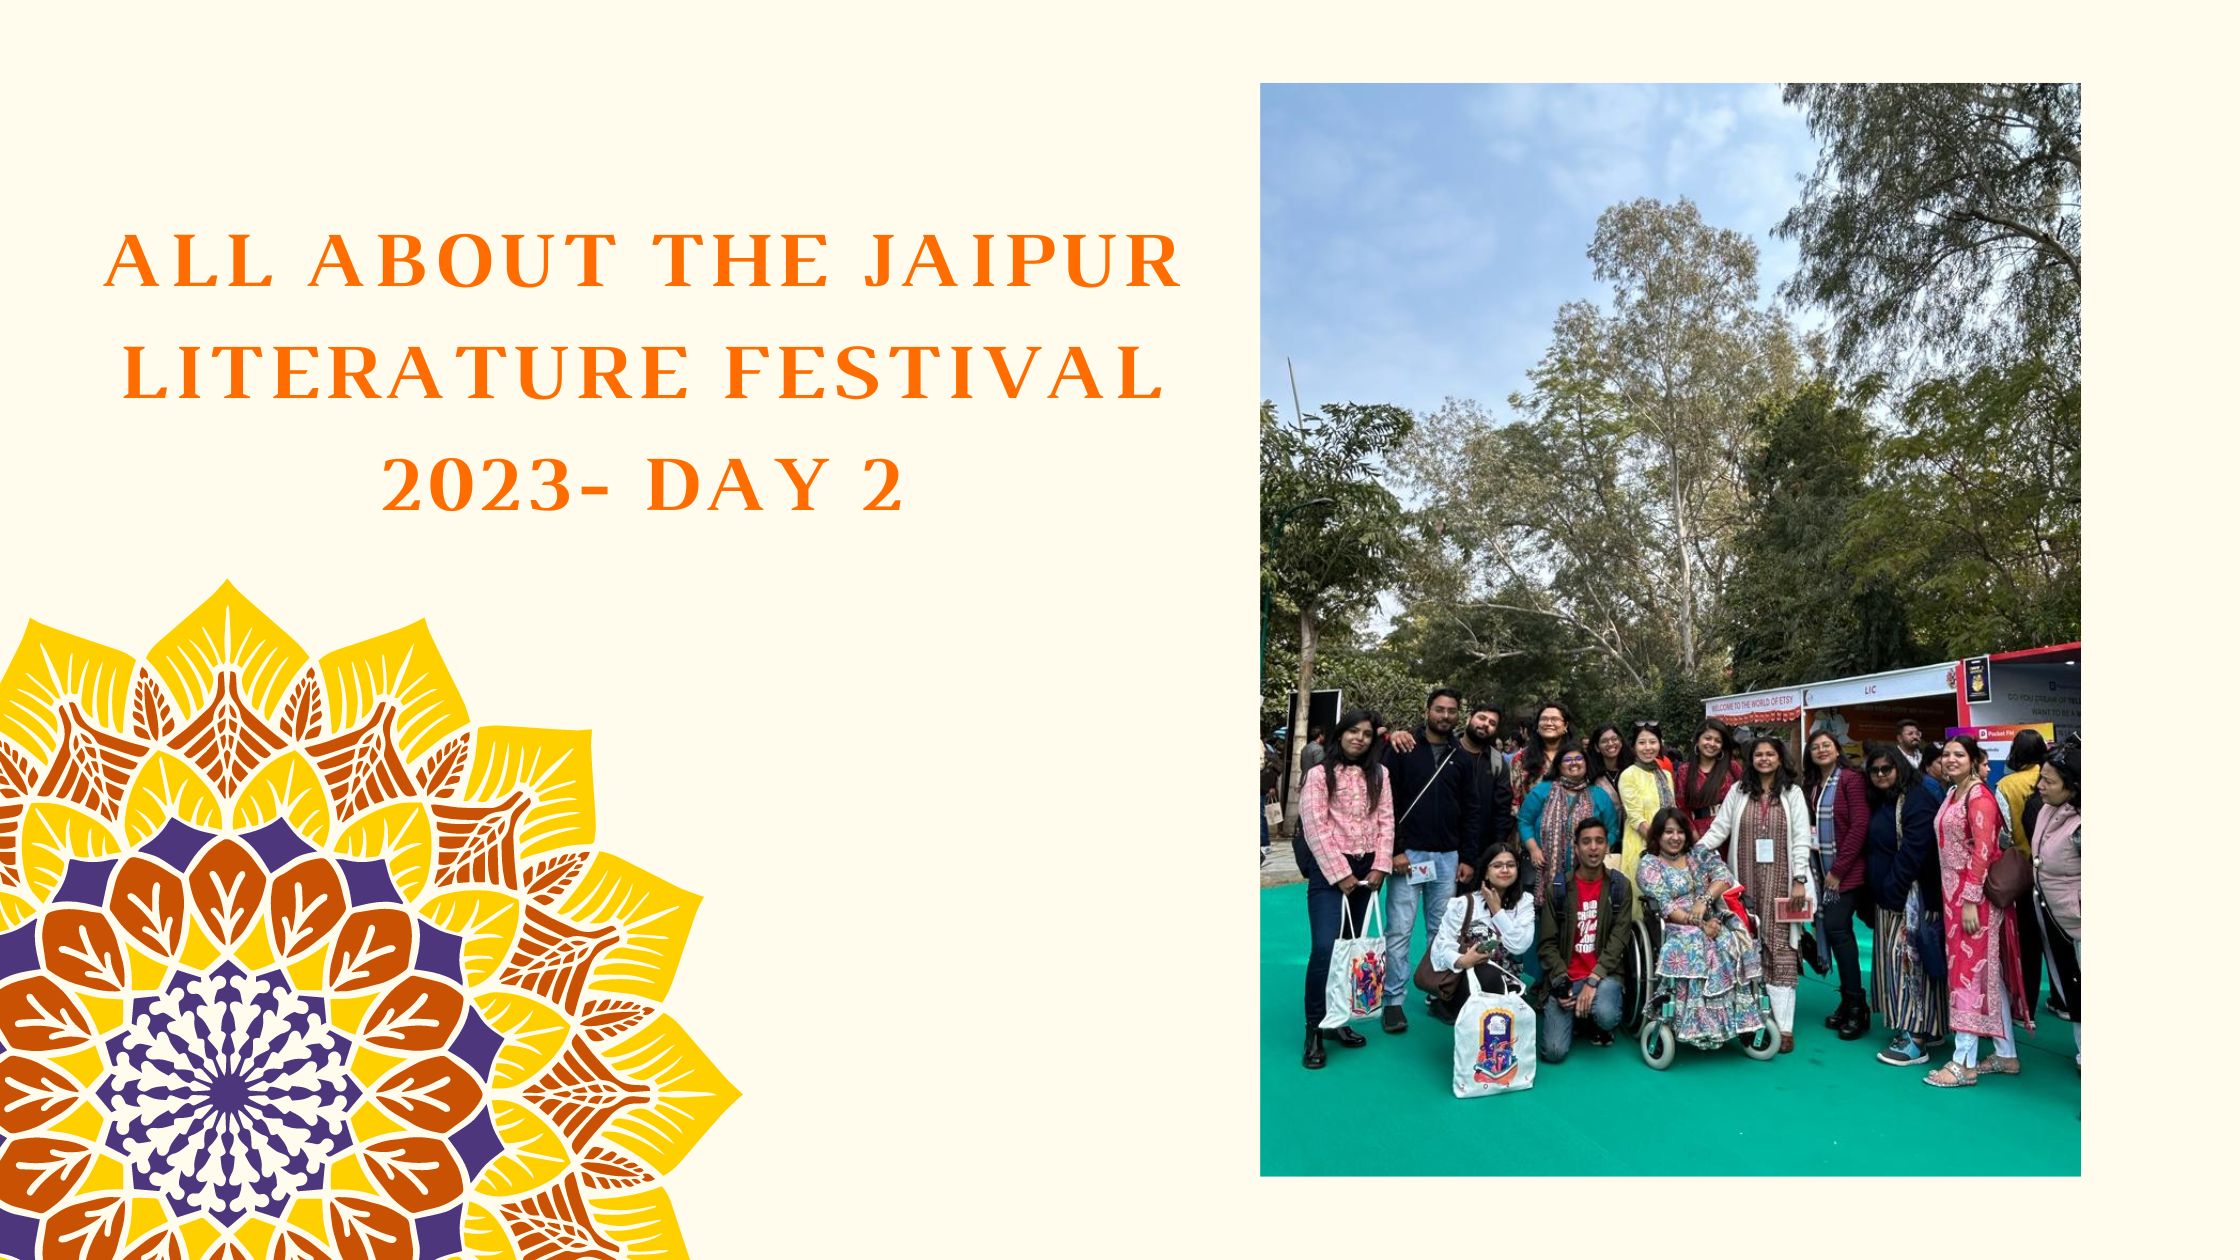 All about the Jaipur Literature Festival 2023- Day 2